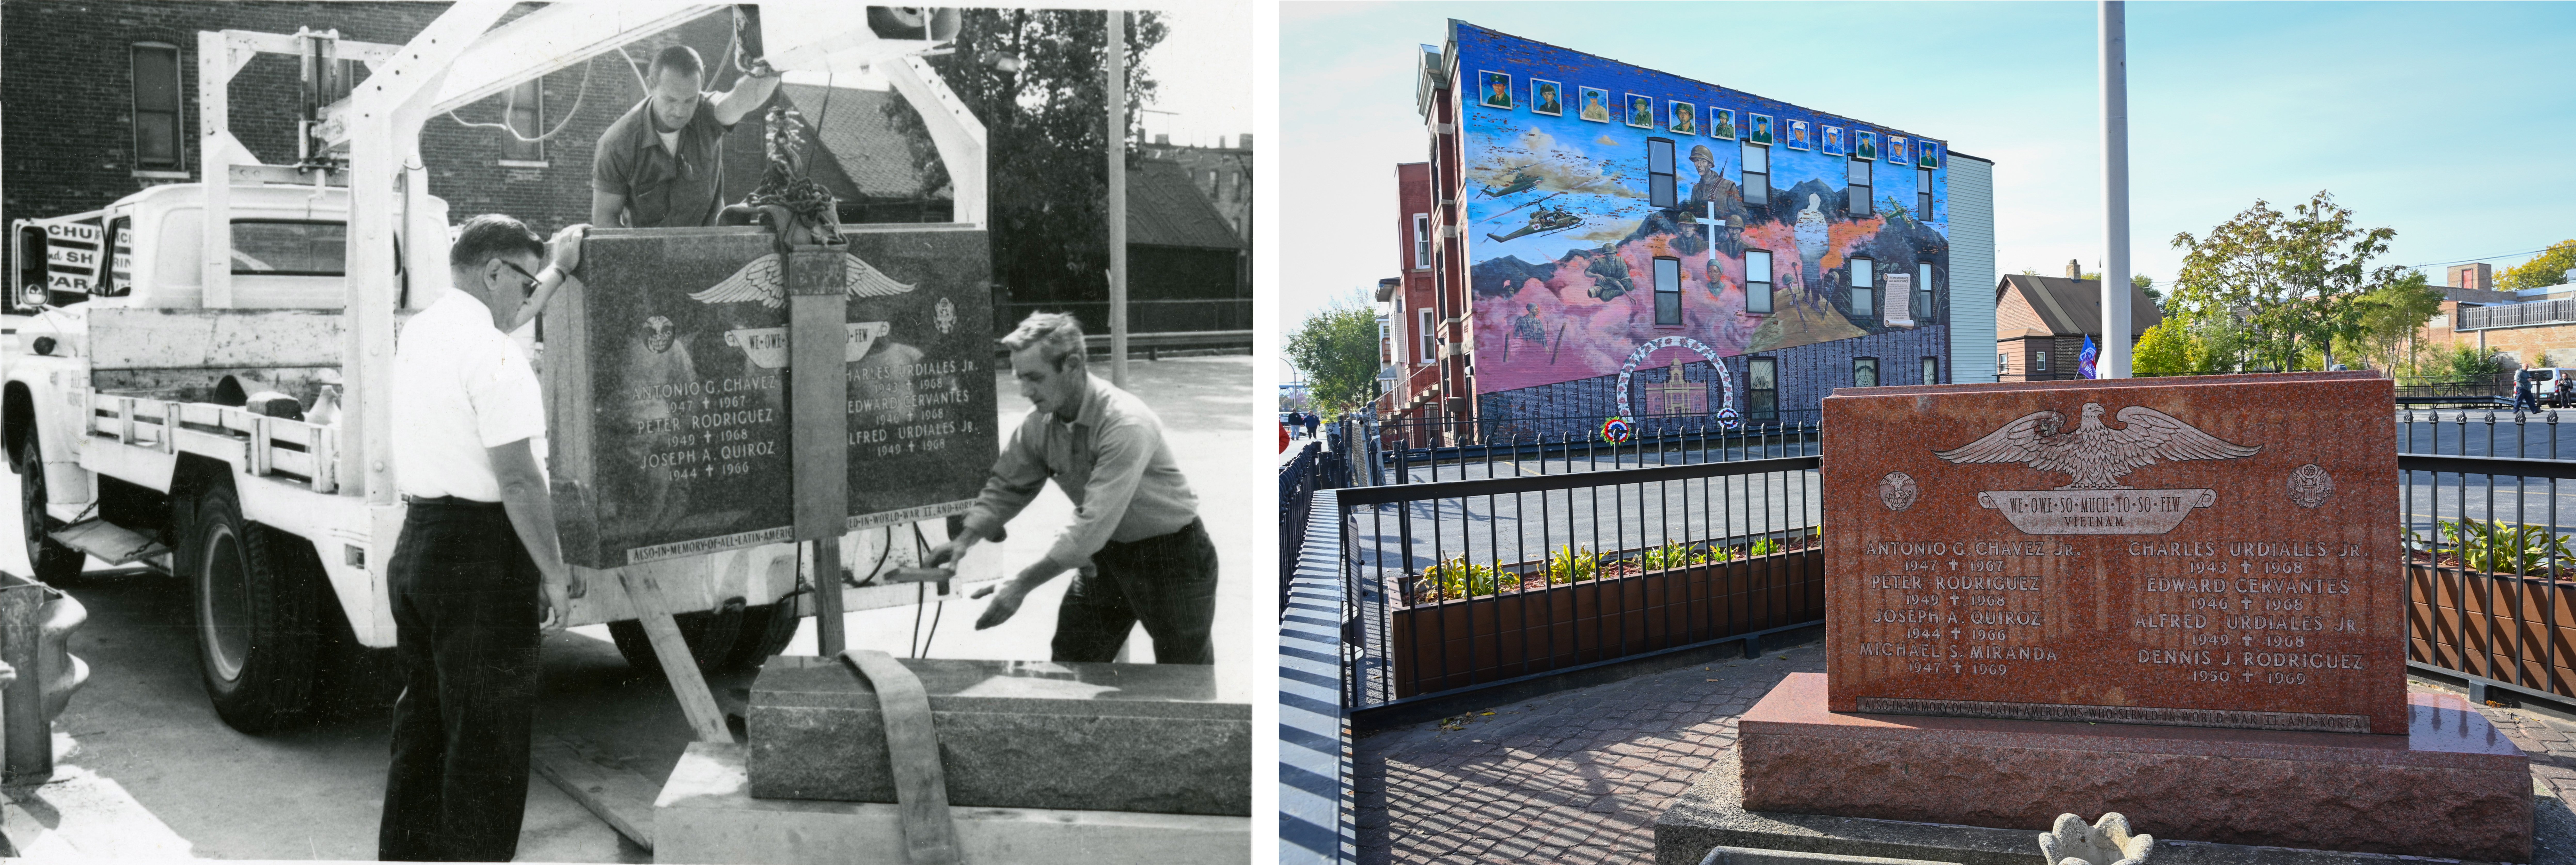 Installation of South Chicago Vietnam Memorial and recent image of memorial